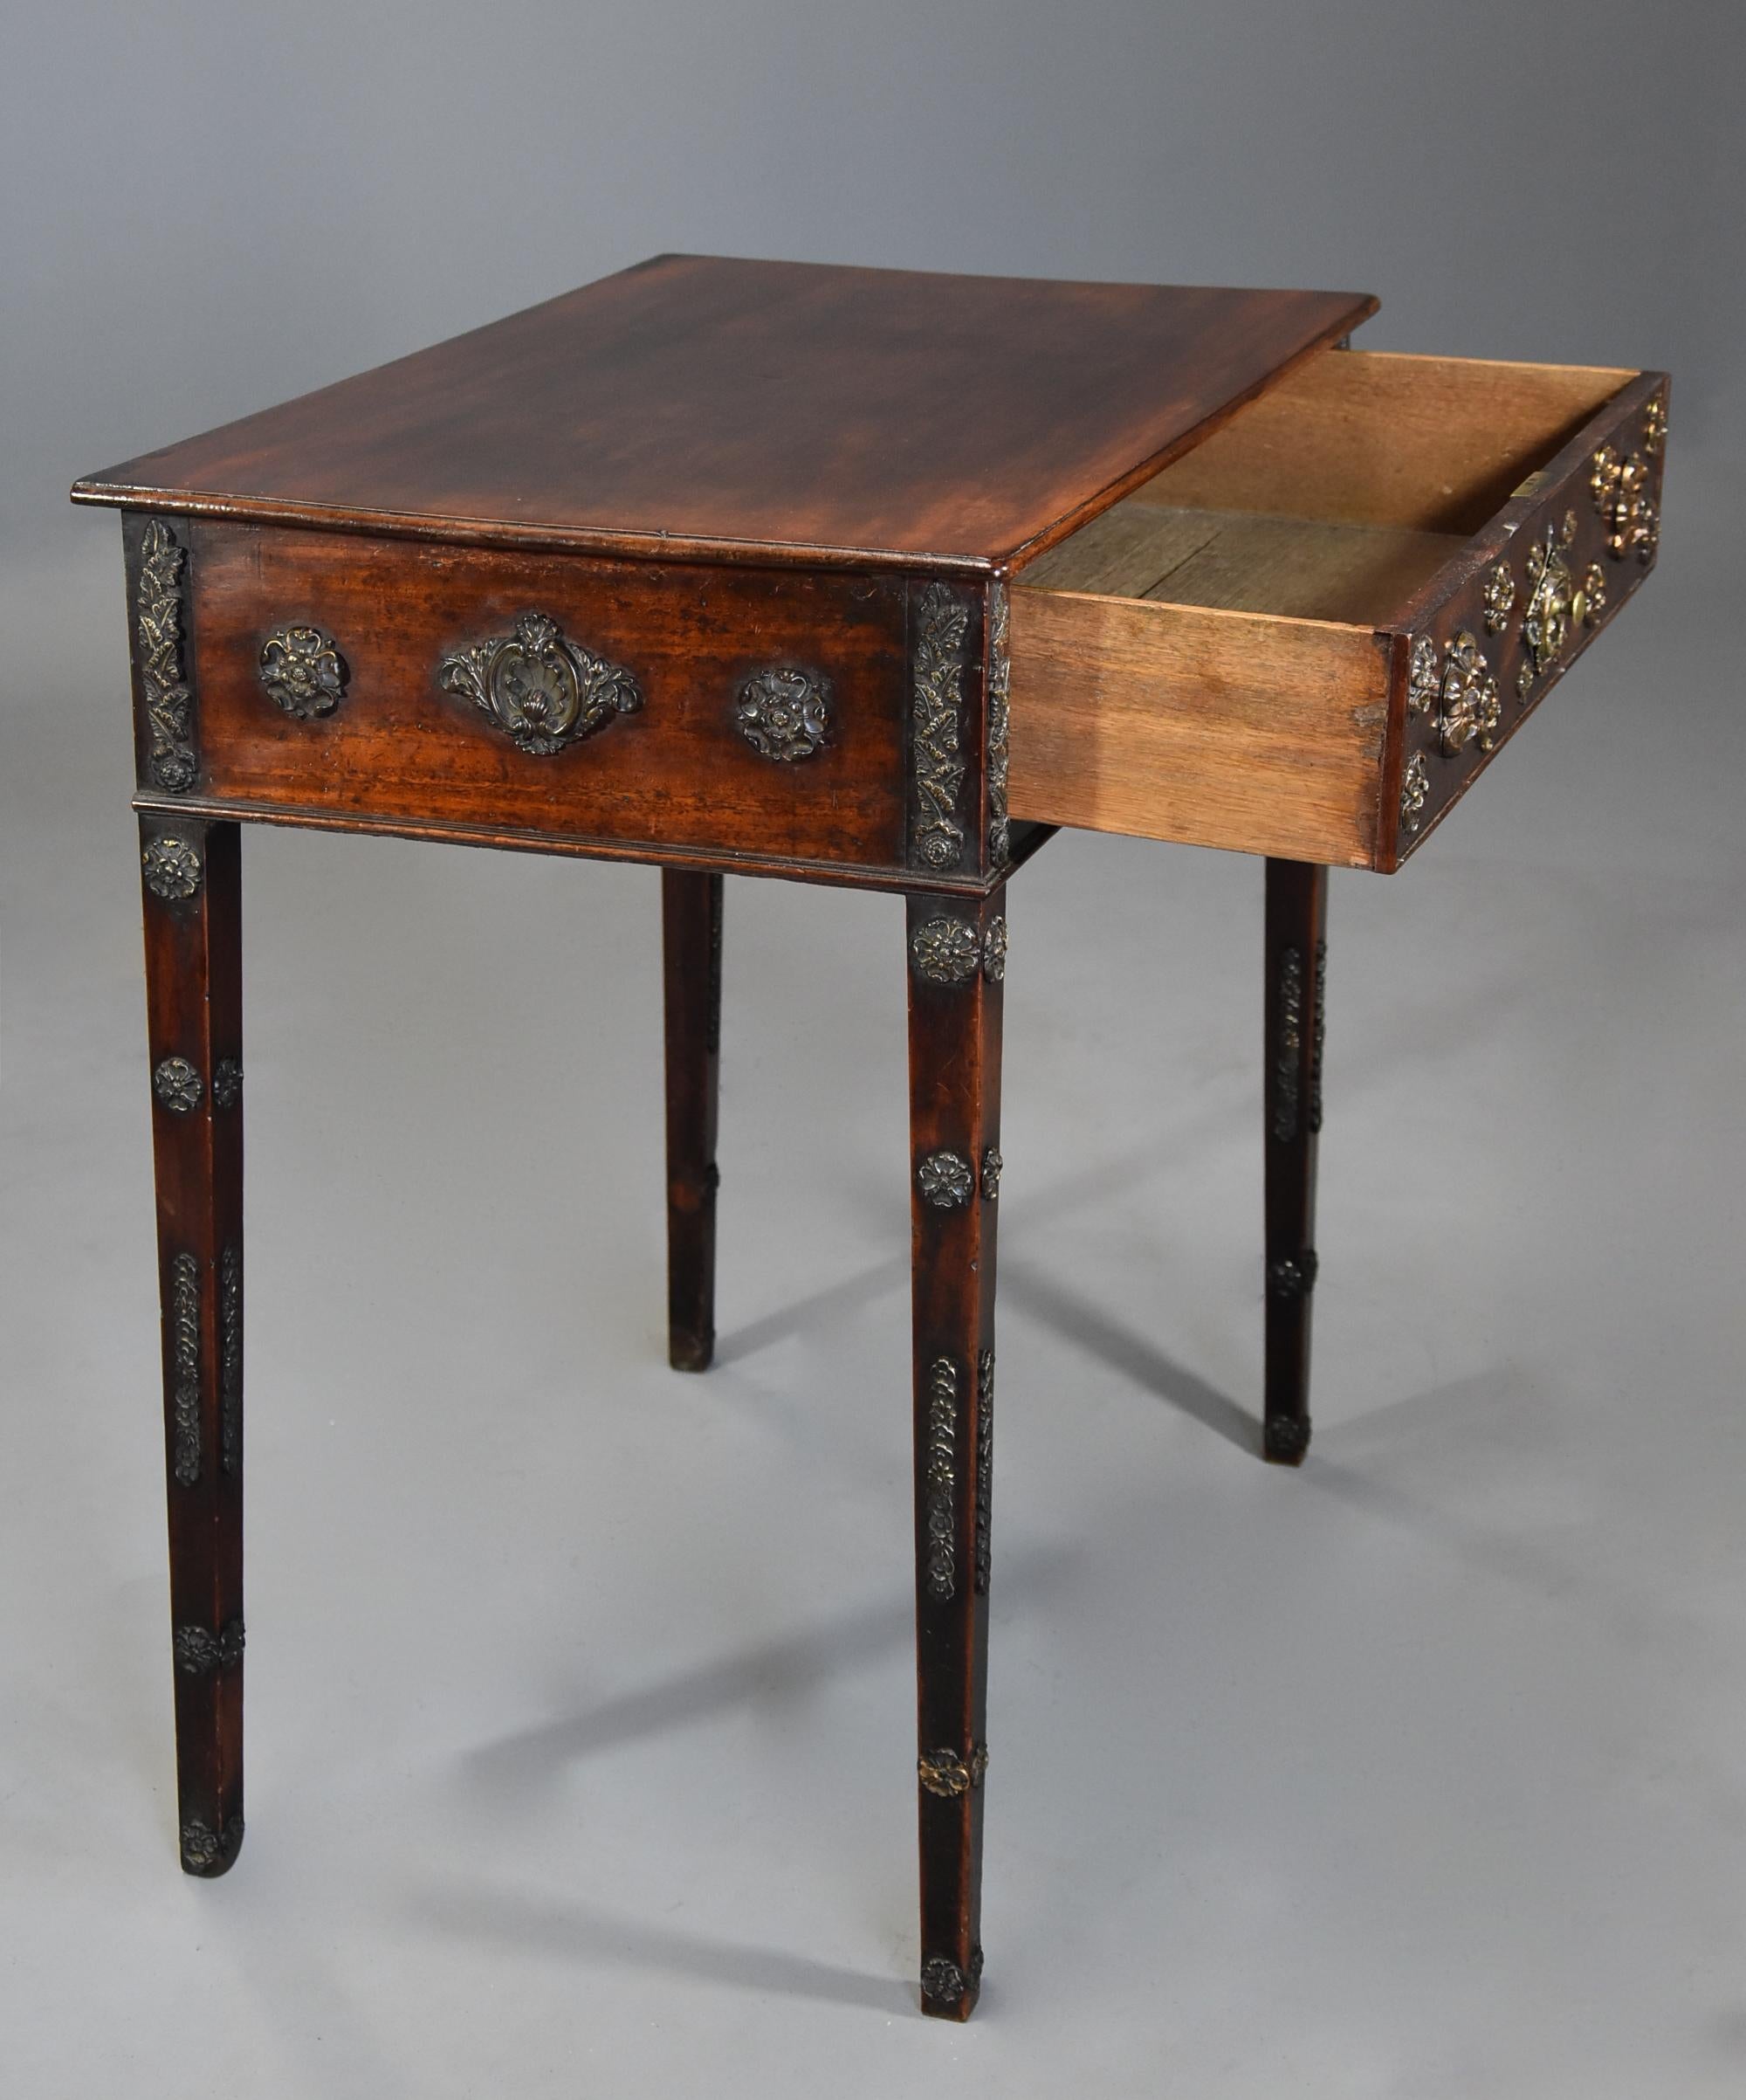 Decorative Late 18th Century Mahogany Side Table with Later Applied Brass Mounts 1